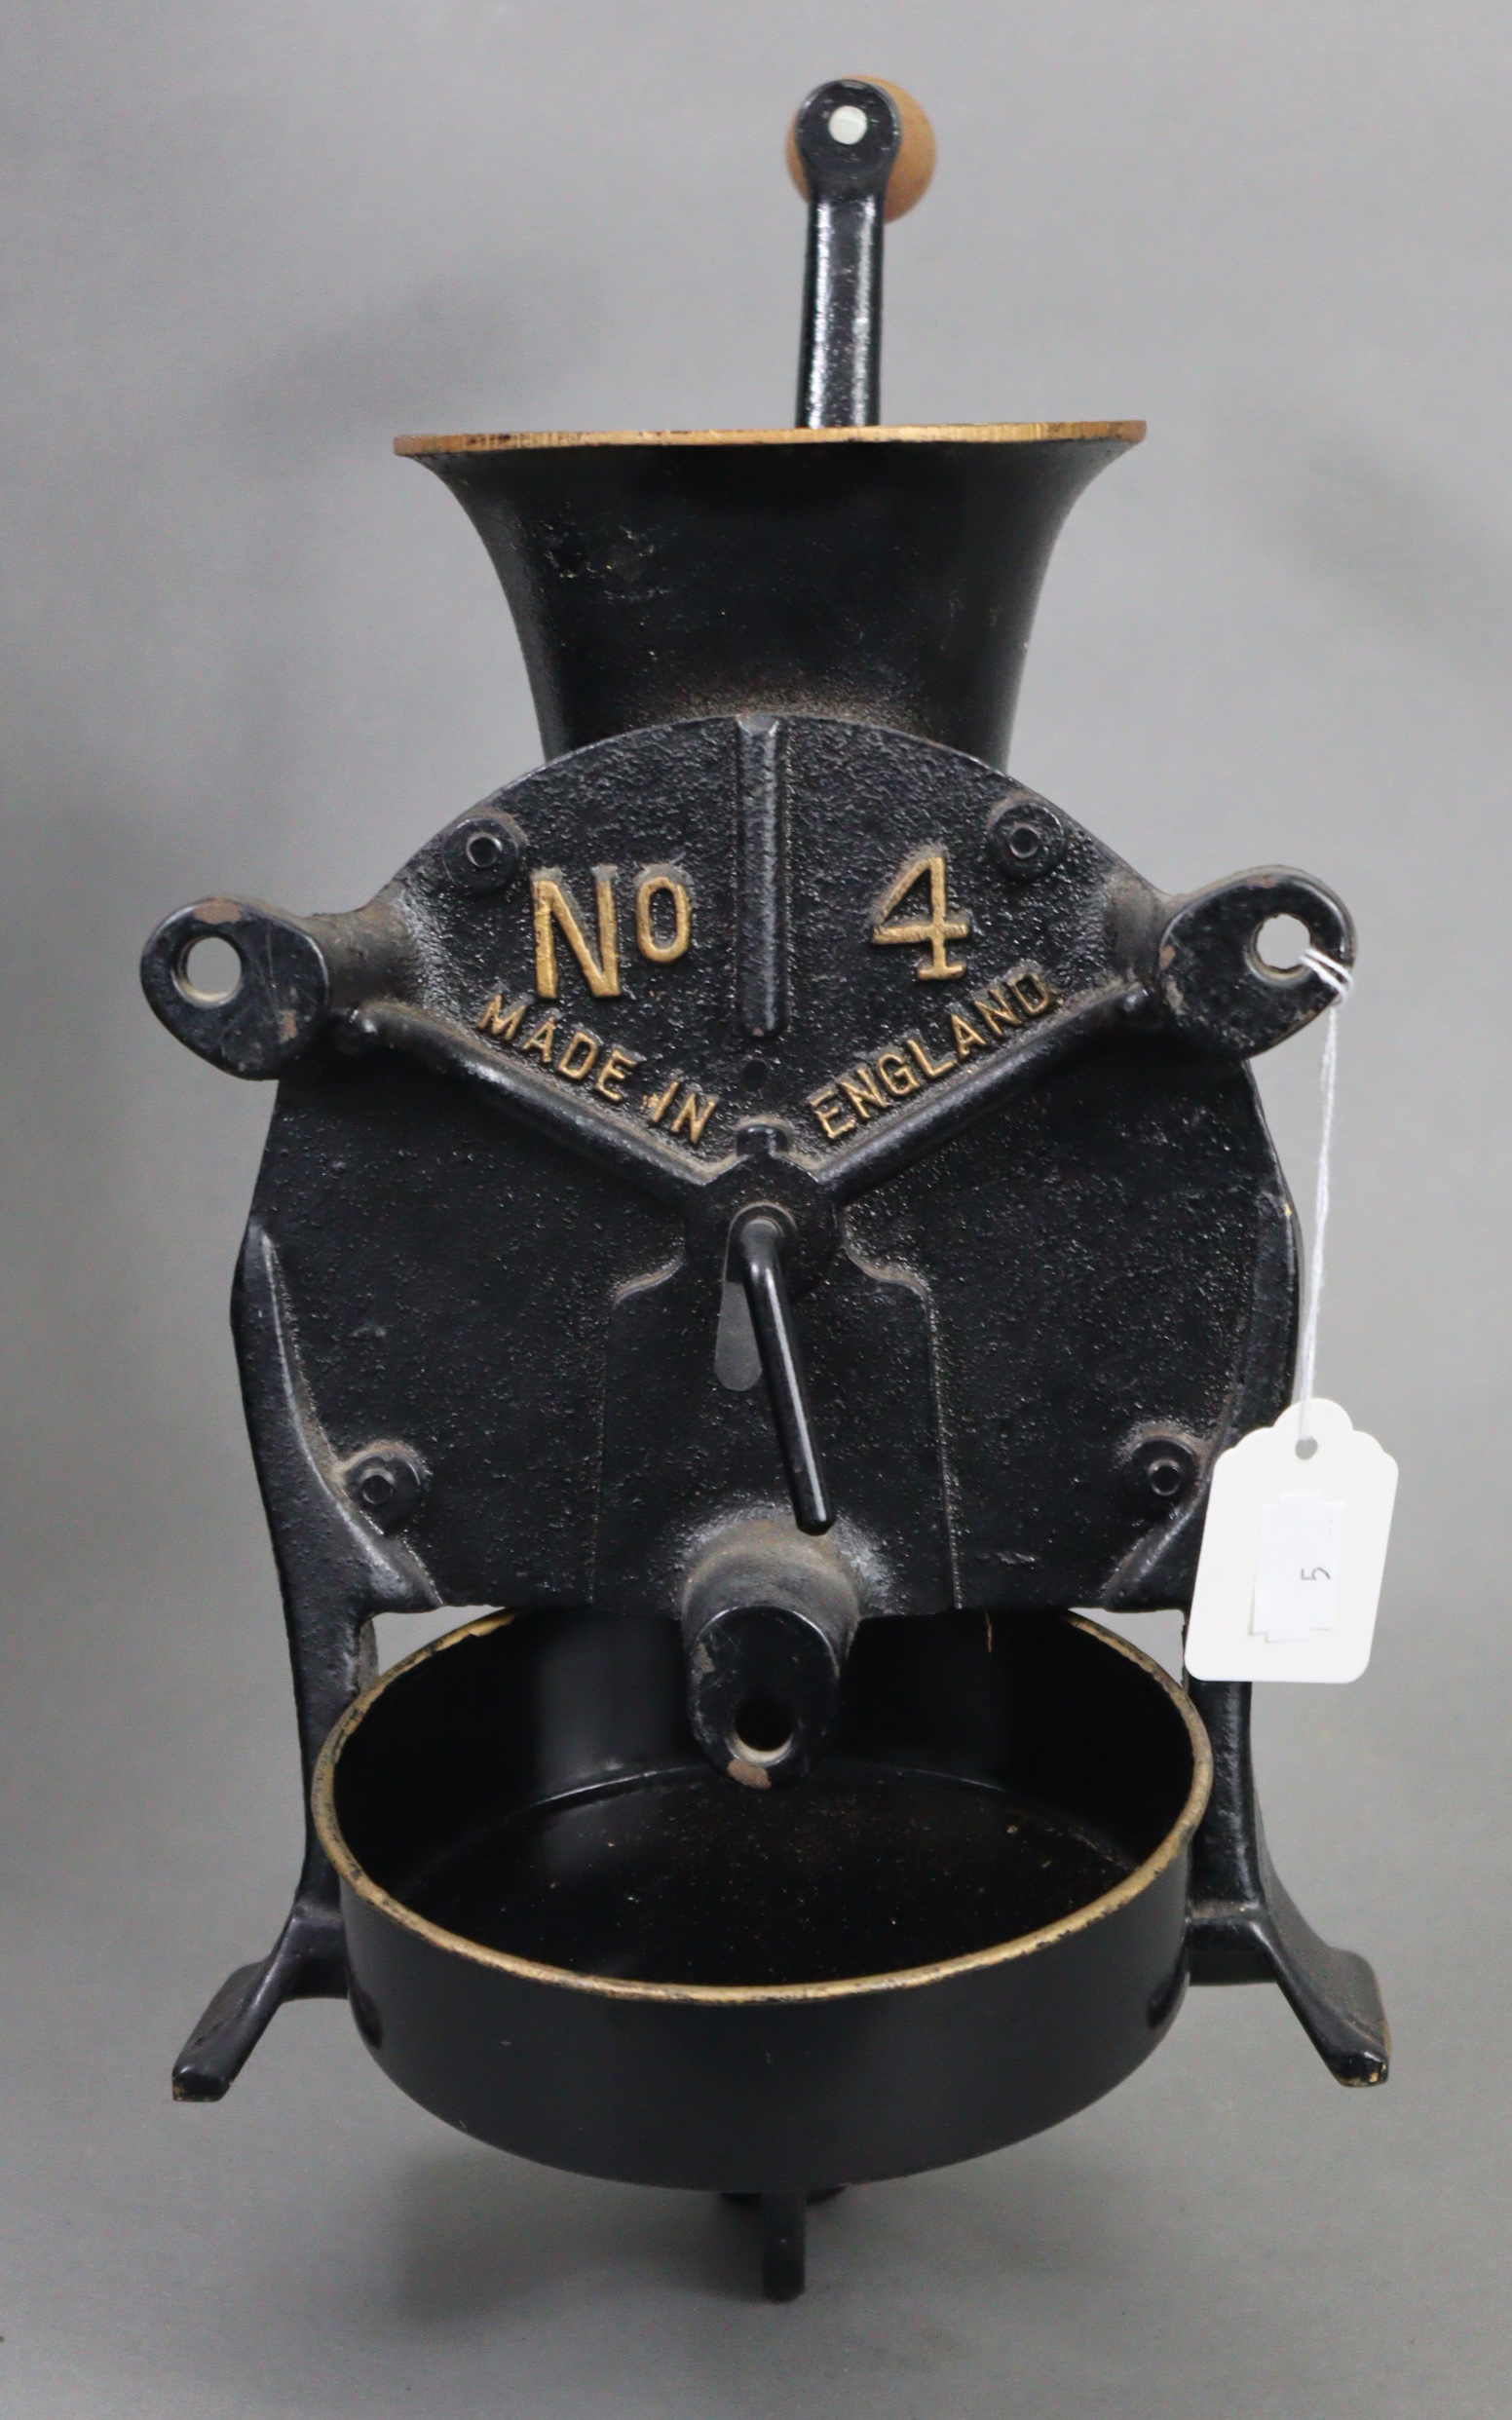 A vintage Spong & Co. Ltd. black & gold painted cast-iron coffee grinder (No. 4), complete with